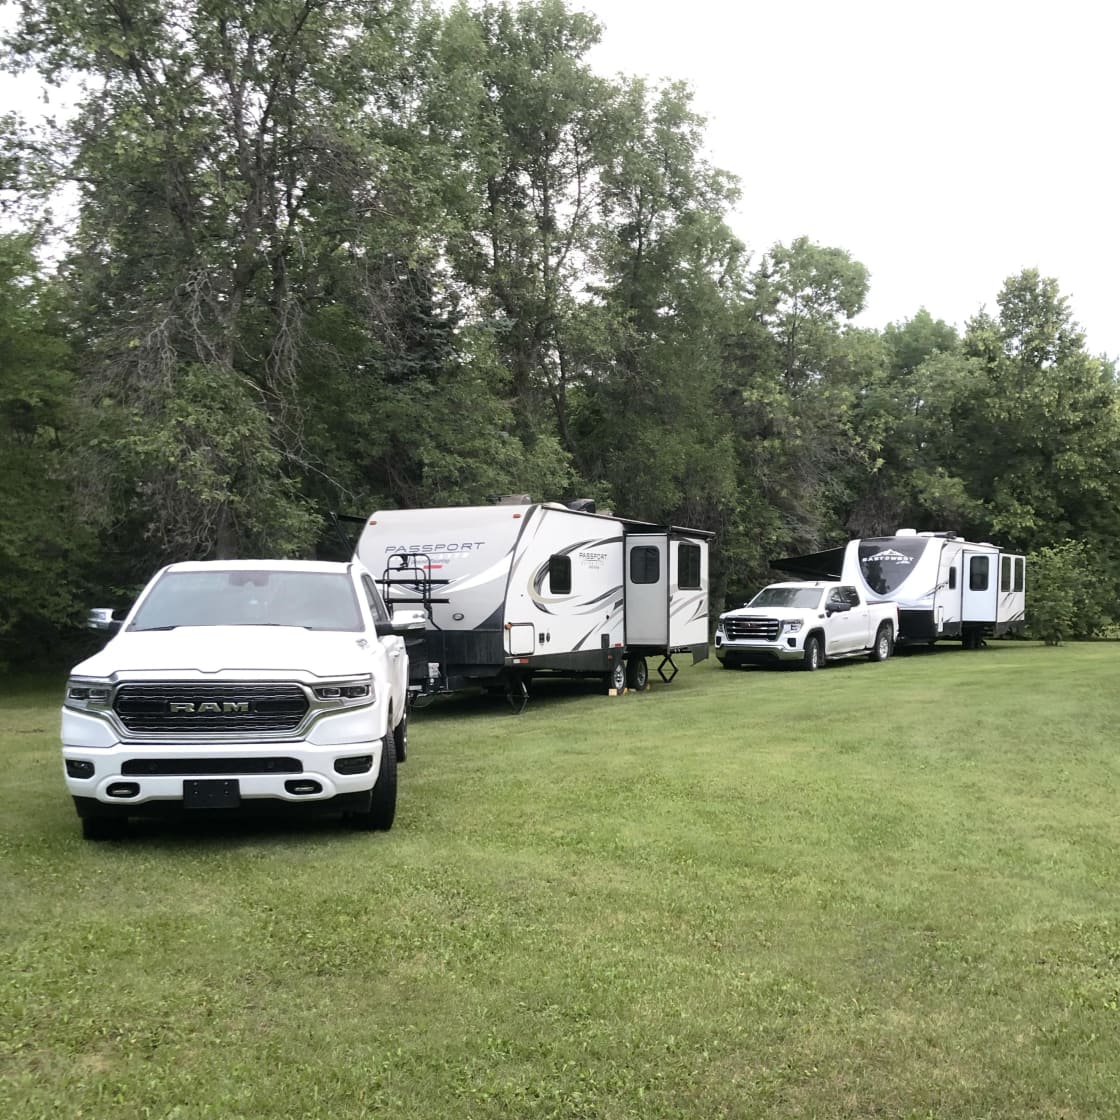 RVs welcome with or without hookups